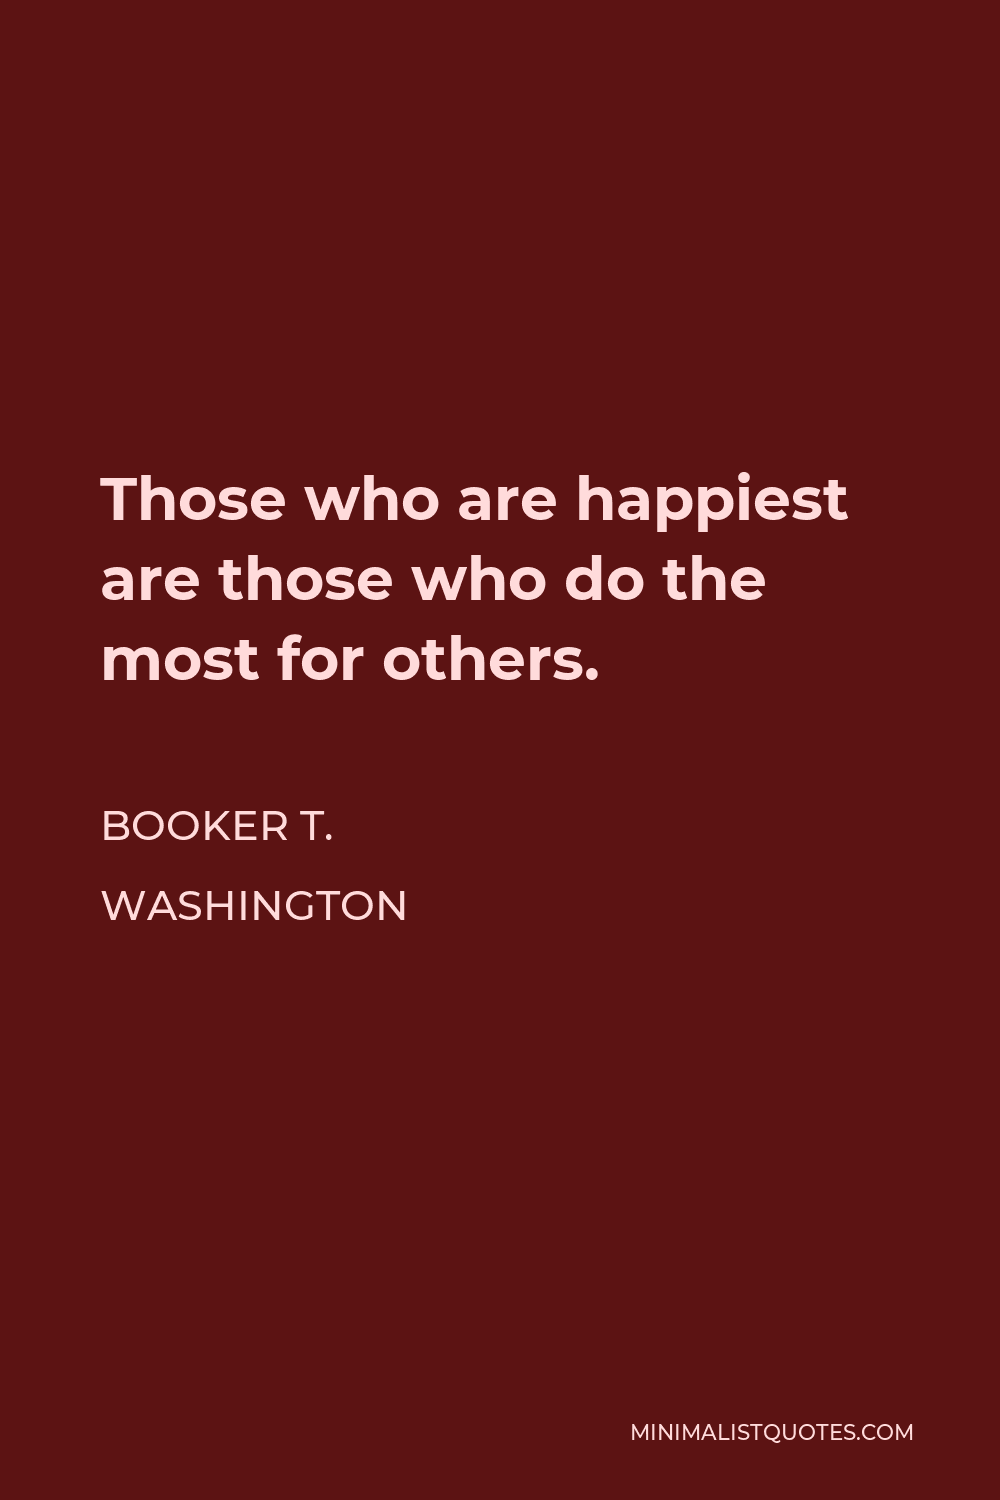 Booker T. Washington Quote - Those who are happiest are those who do the most for others.